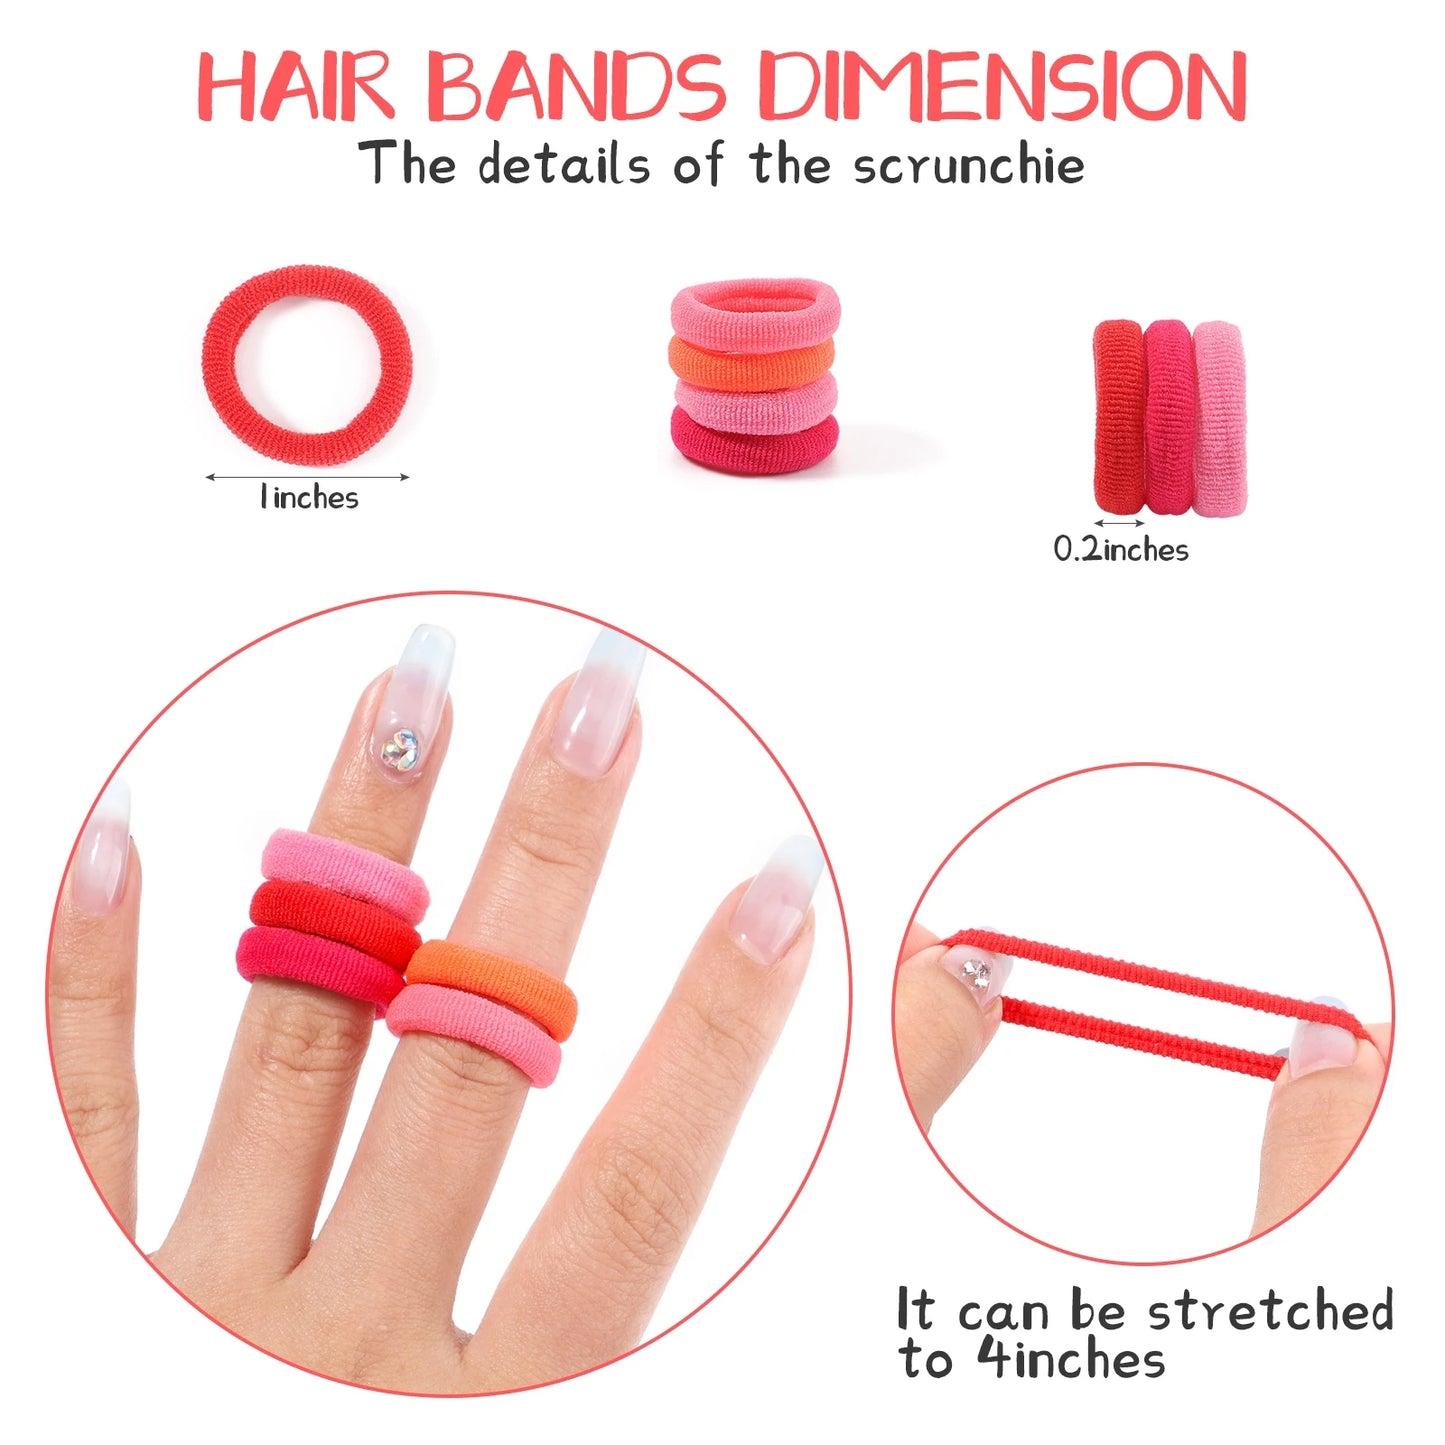 20/50pcs Kids Elastic Hair Bands Girls Sweets Scrunchie Rubber Band for Children Hair Ties Clips Headband Baby Hair Accessories